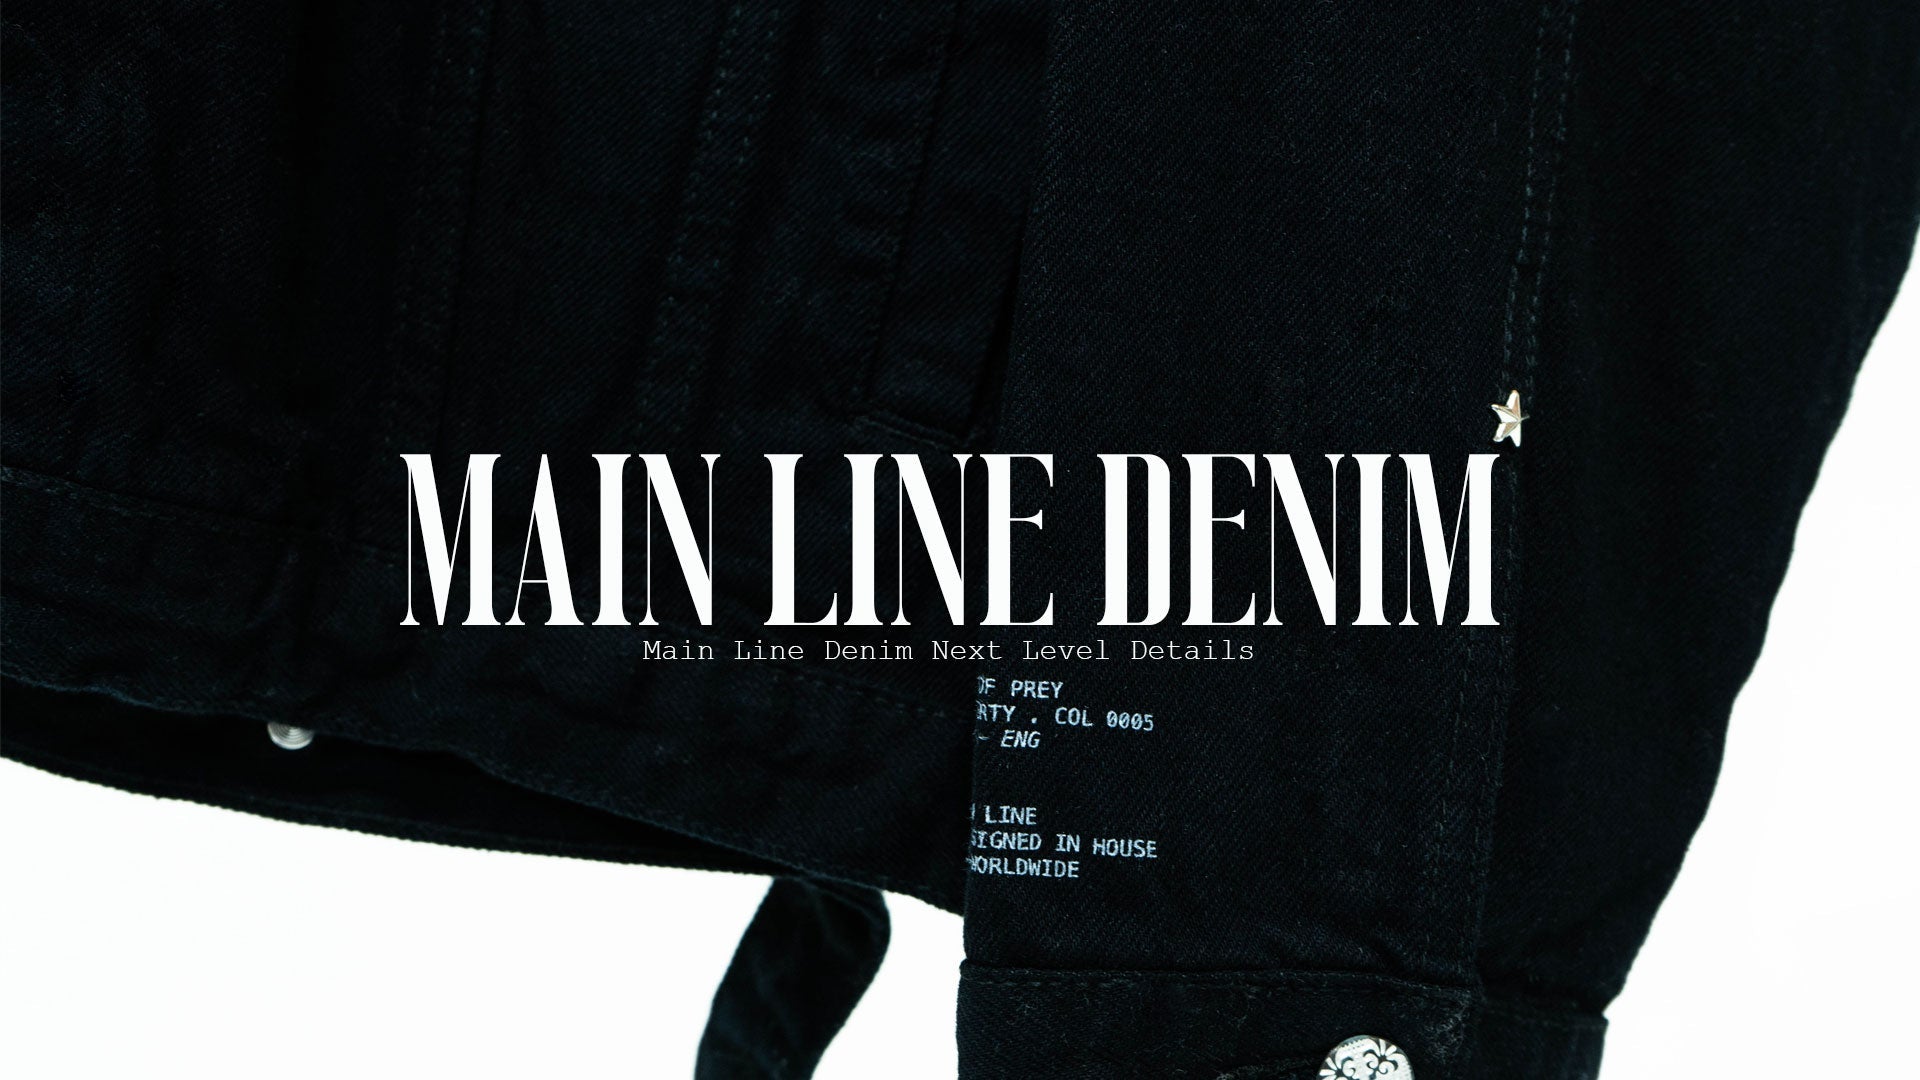 All New Main Line Denim - Wings Of Liberty Clothing